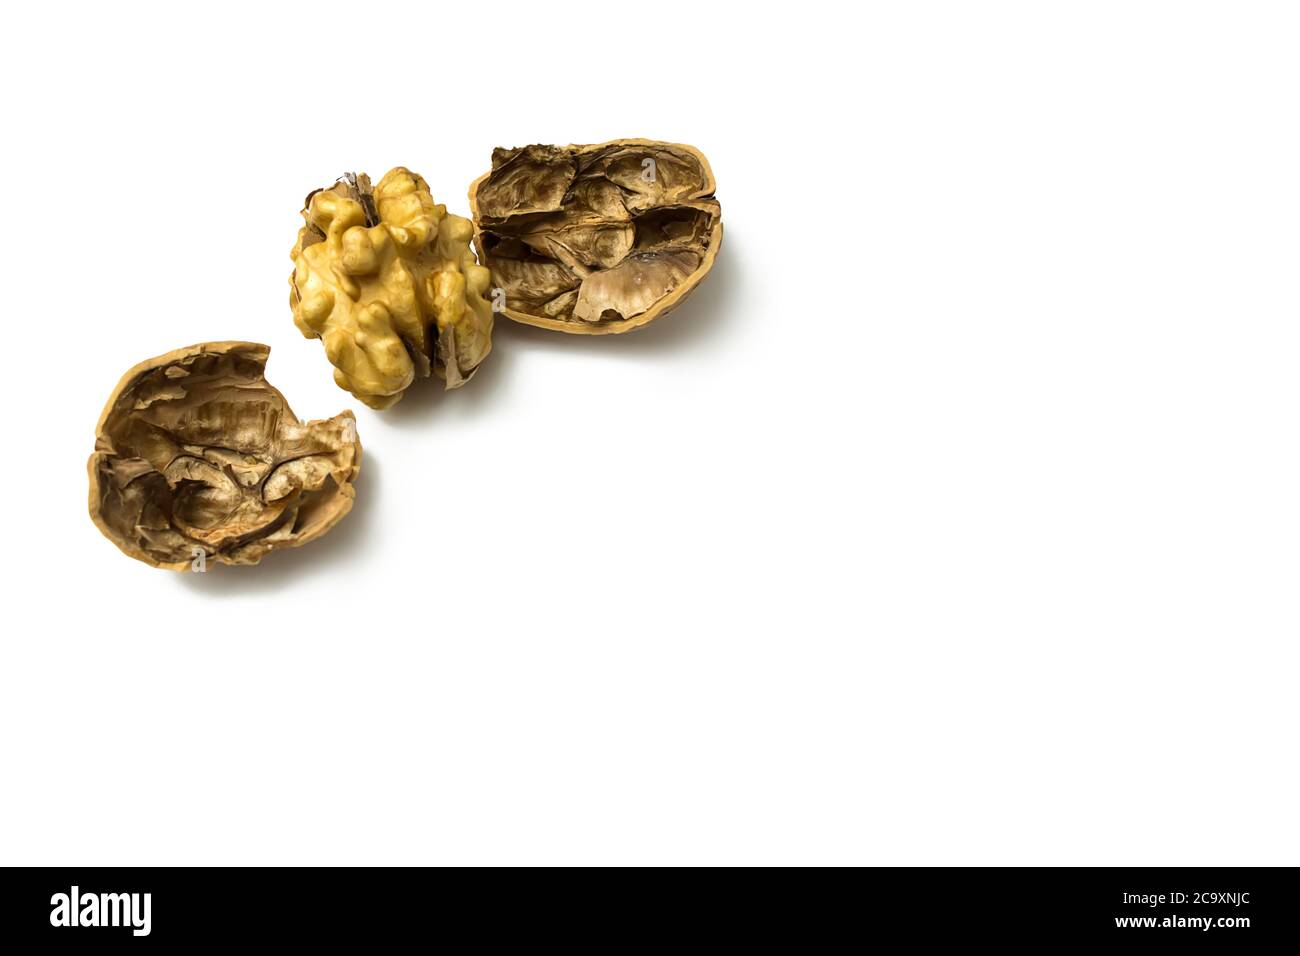 Close-Up Of Crushed Walnuts With Nutshell Isolated On White Background Stock Photo